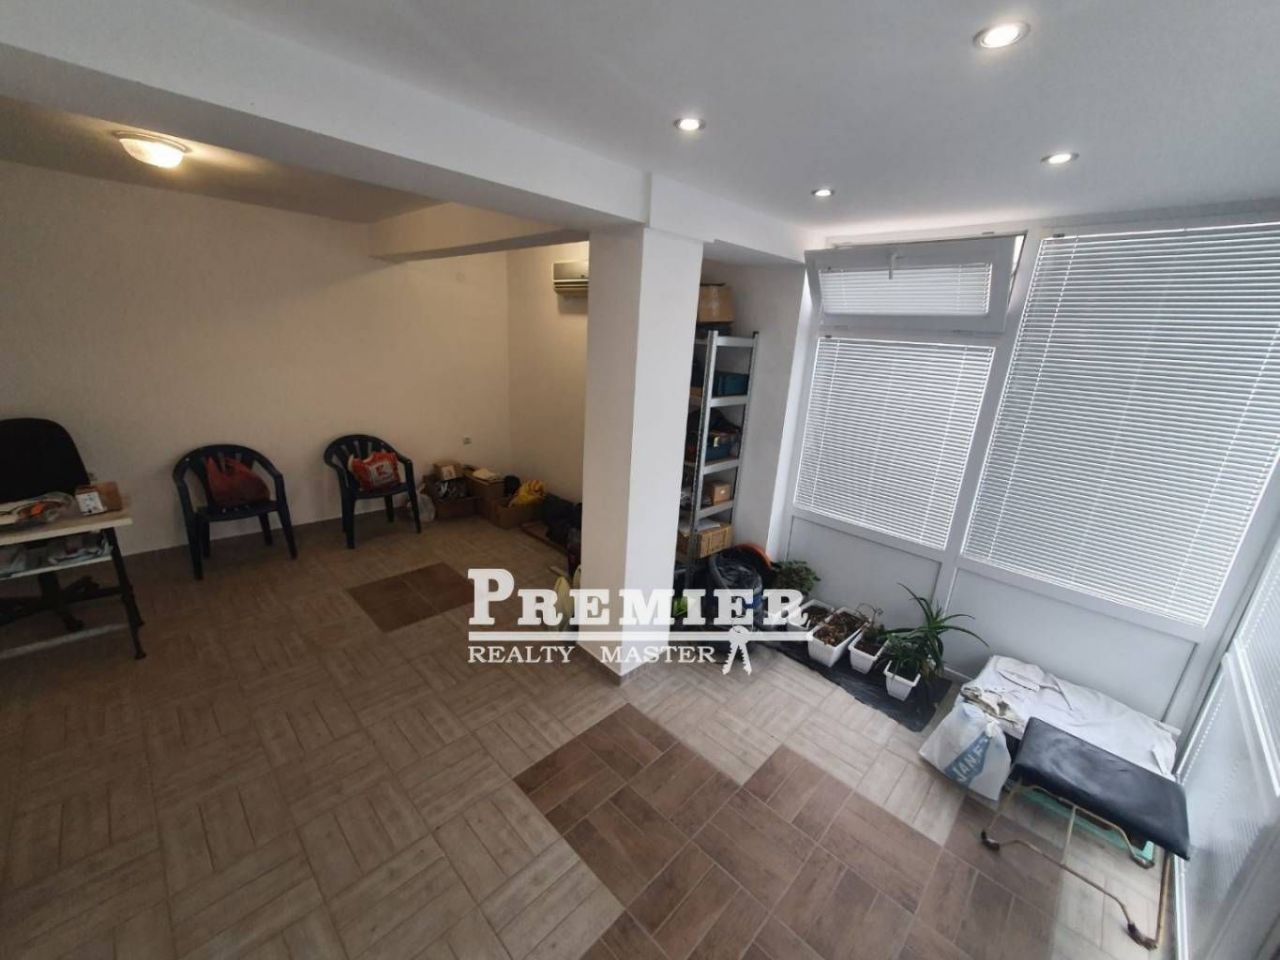 Commercial property in Nesebar, Bulgaria, 36 sq.m - picture 1